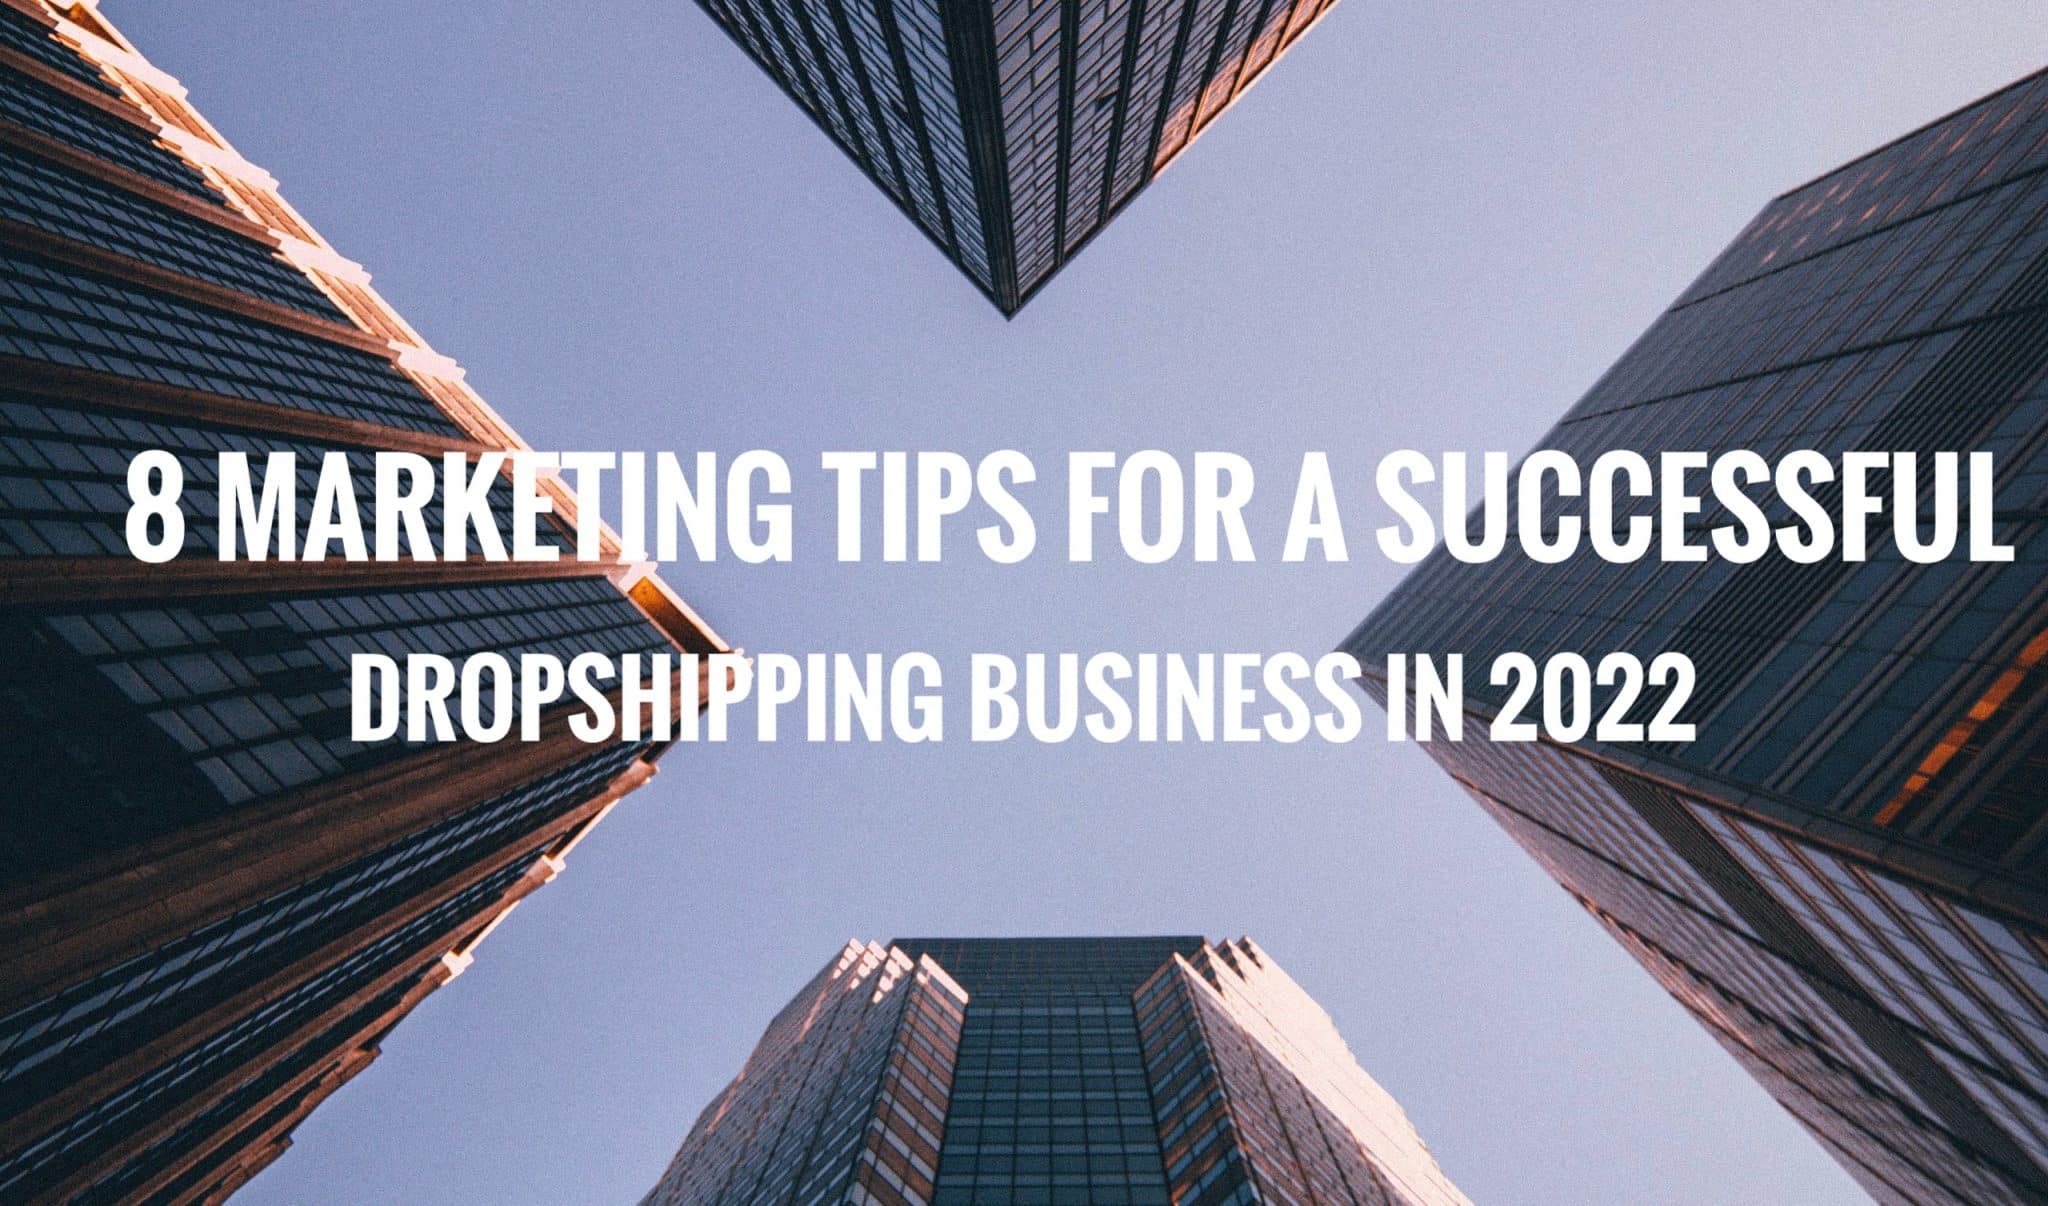 8 Marketing Tips for a Successful Dropshipping Business in 2022